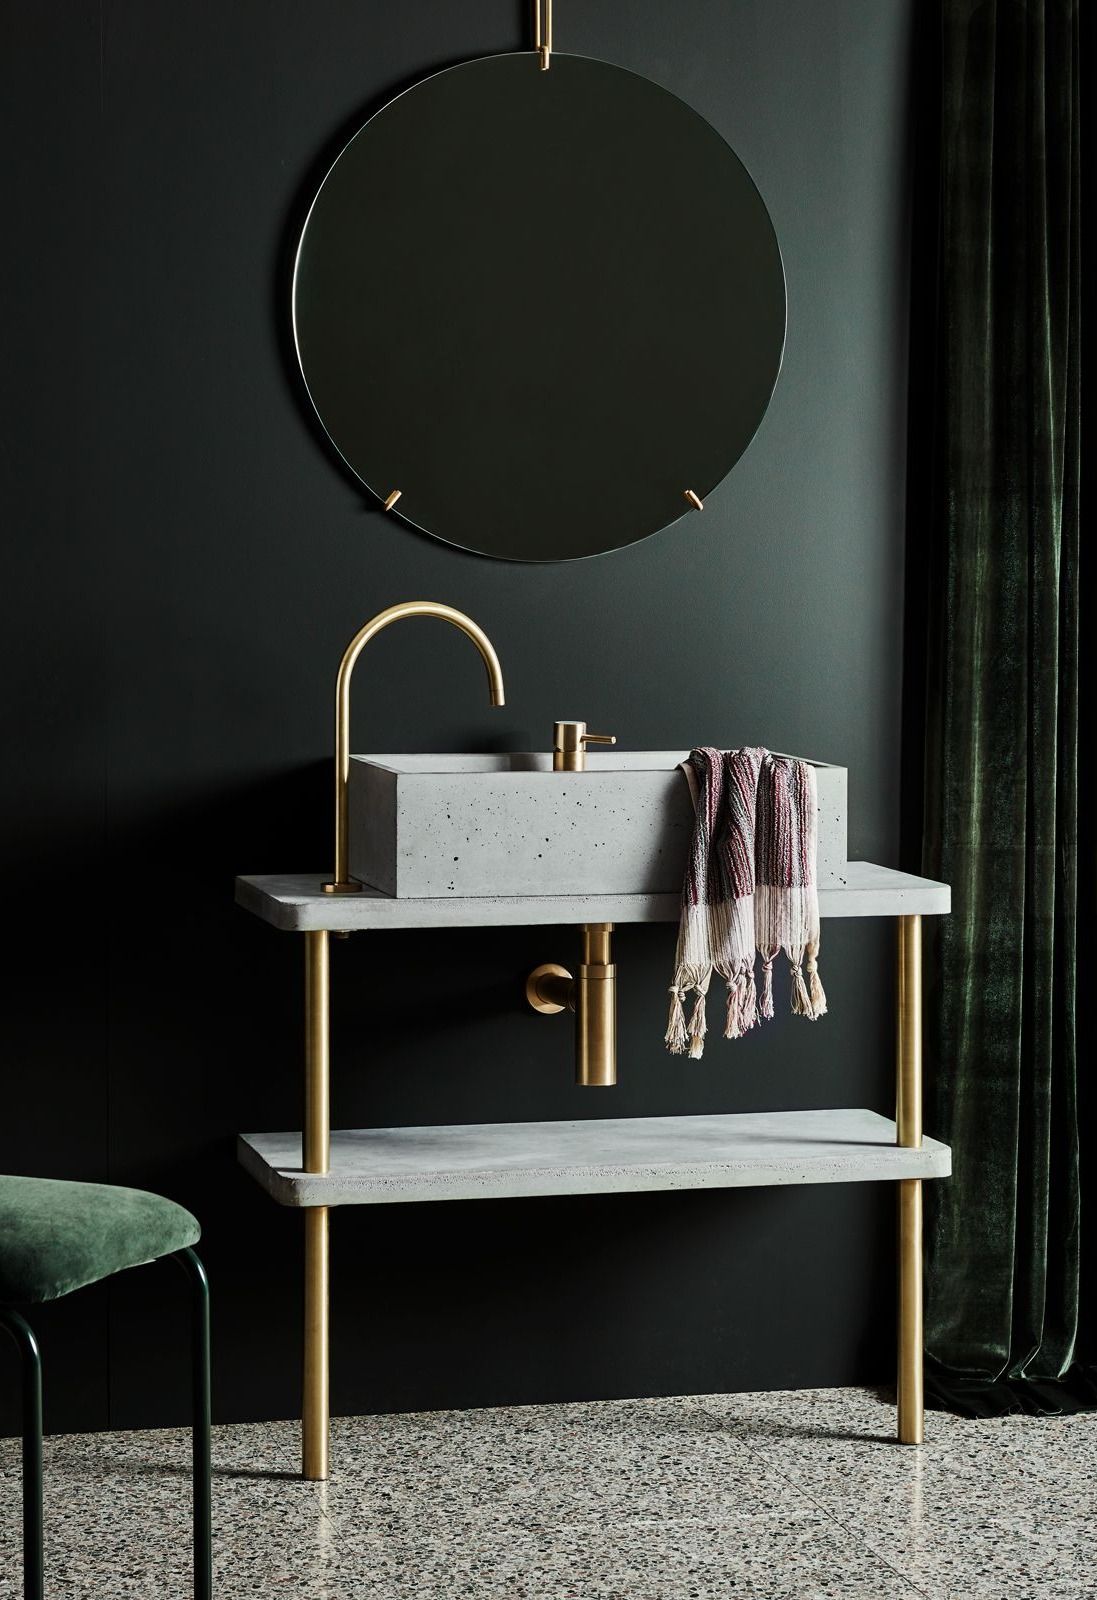 Wood Melbourne 2019 Collection. Wood Melbourne's 2019 collection featuring Wolff Vanity unit